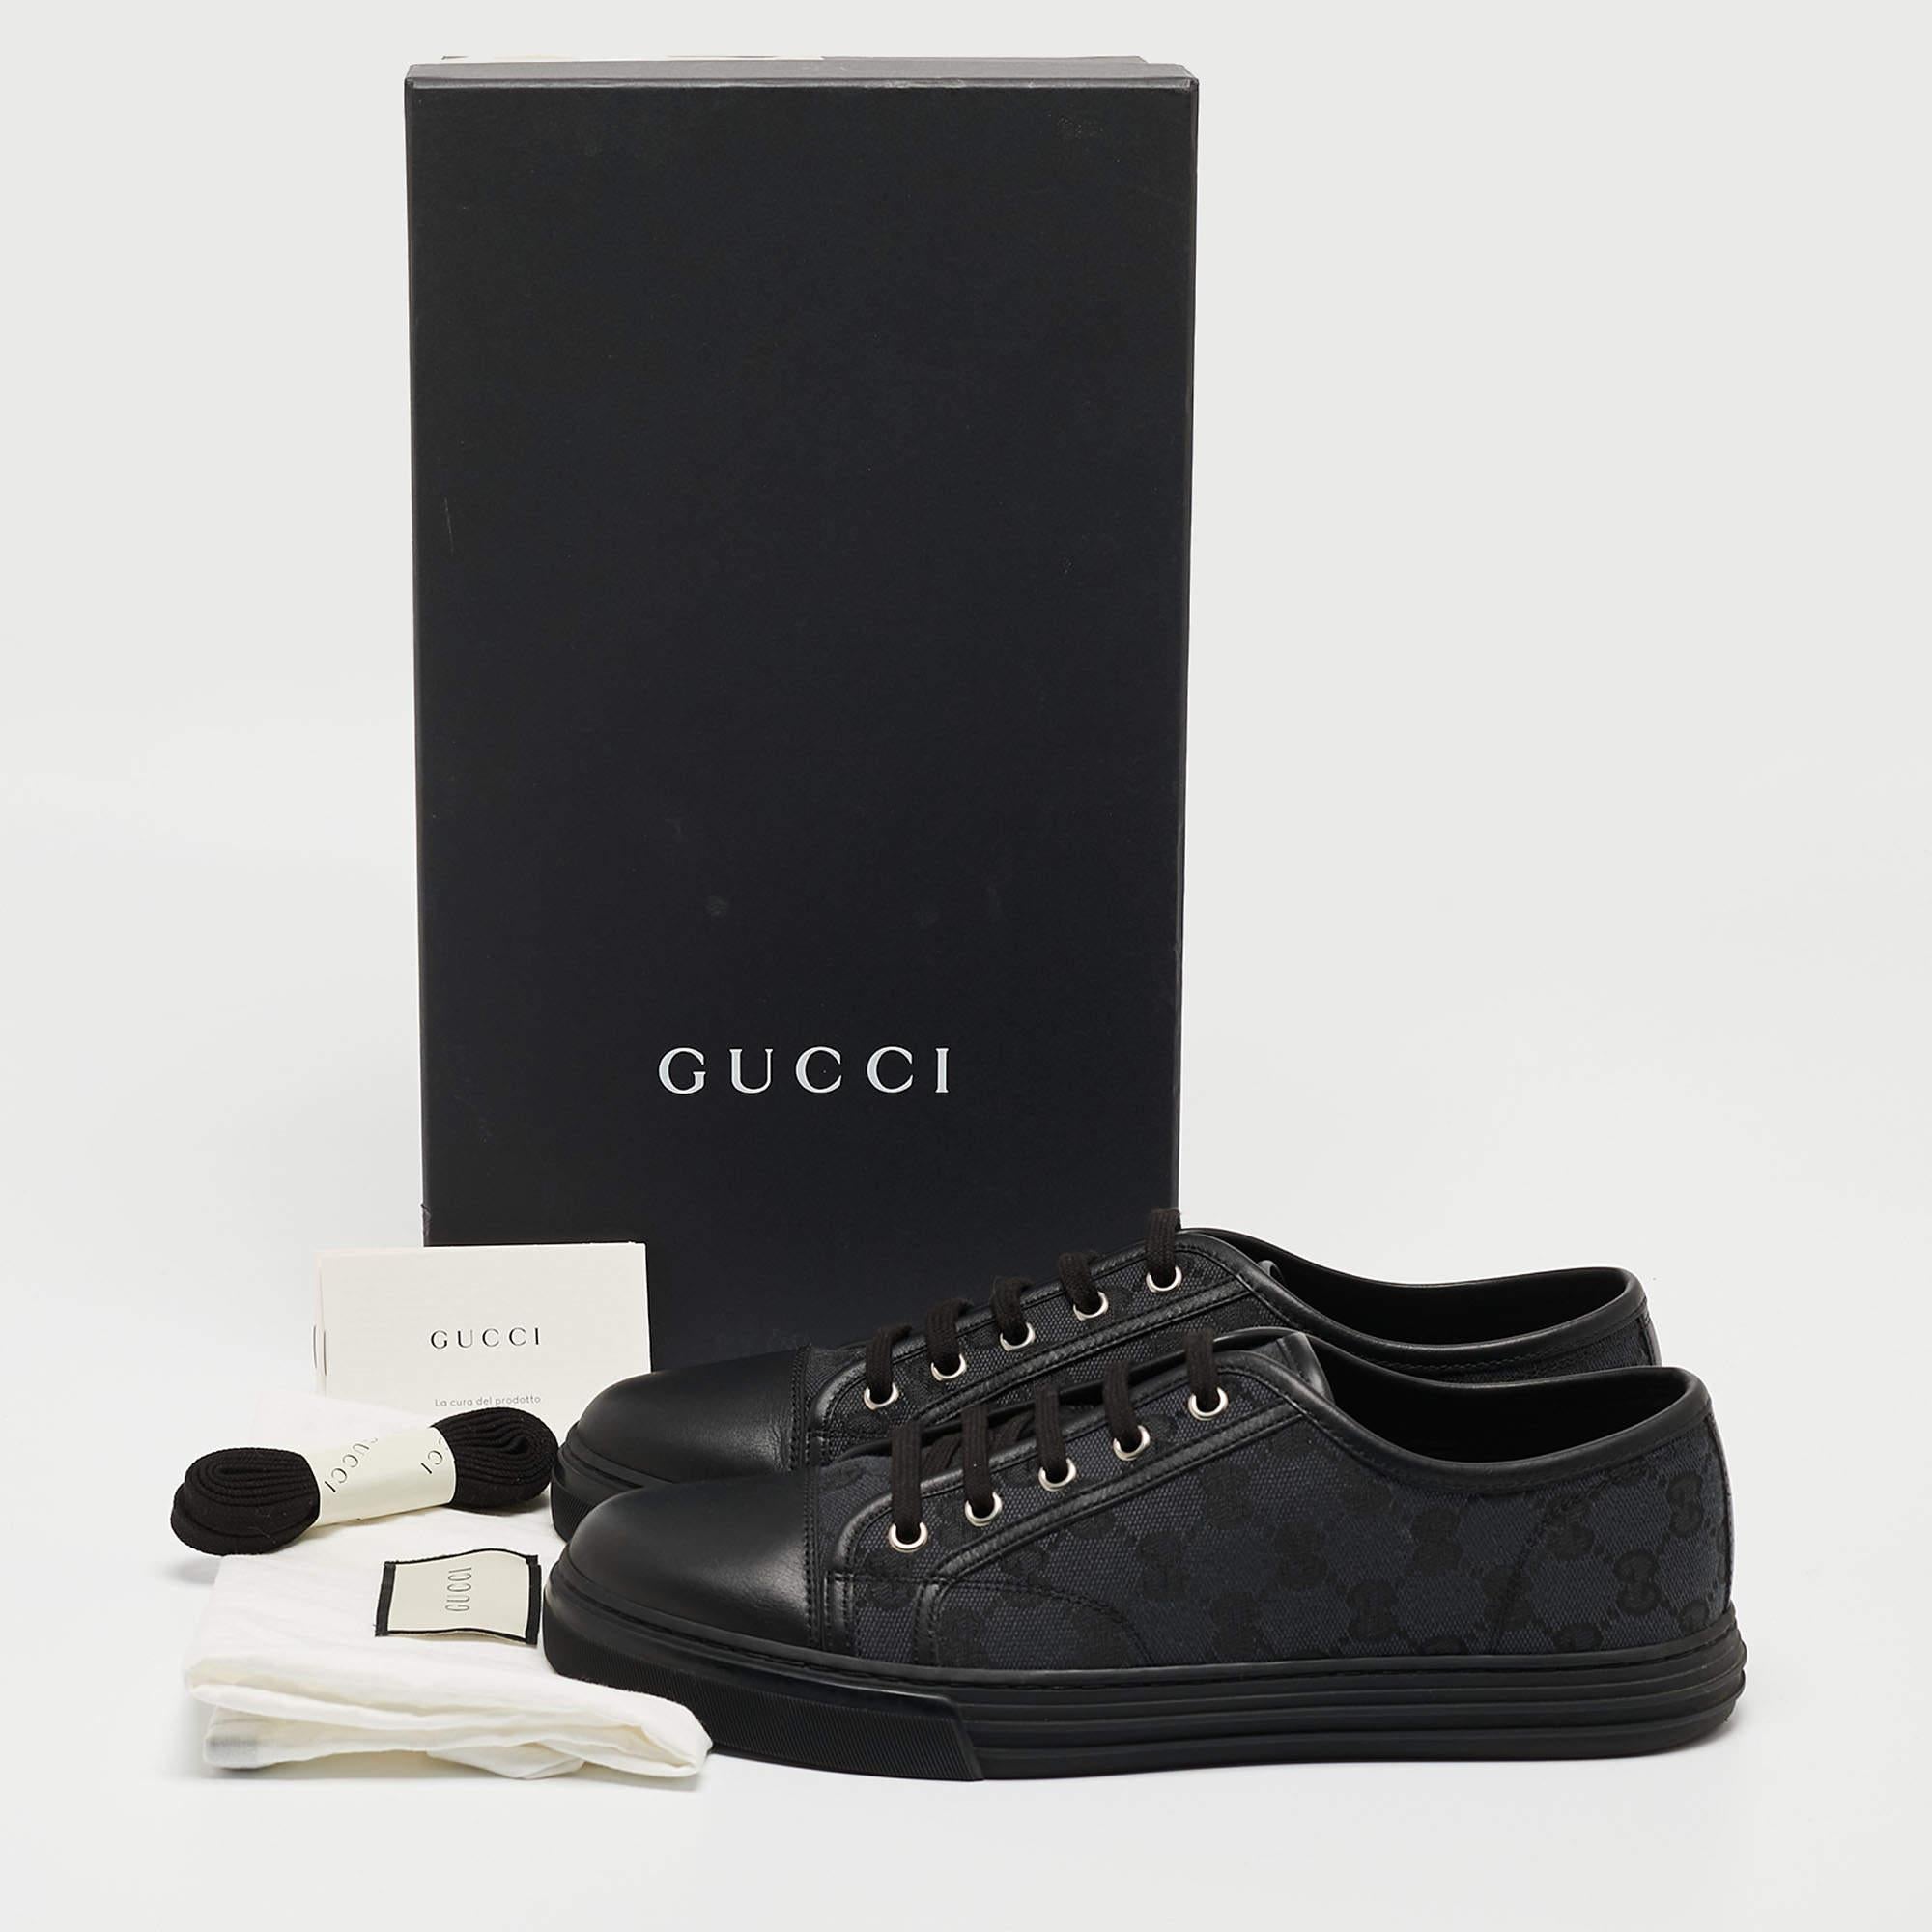 Gucci Black GG Canvas and Leather Low Top Sneakers Size 41.5 5